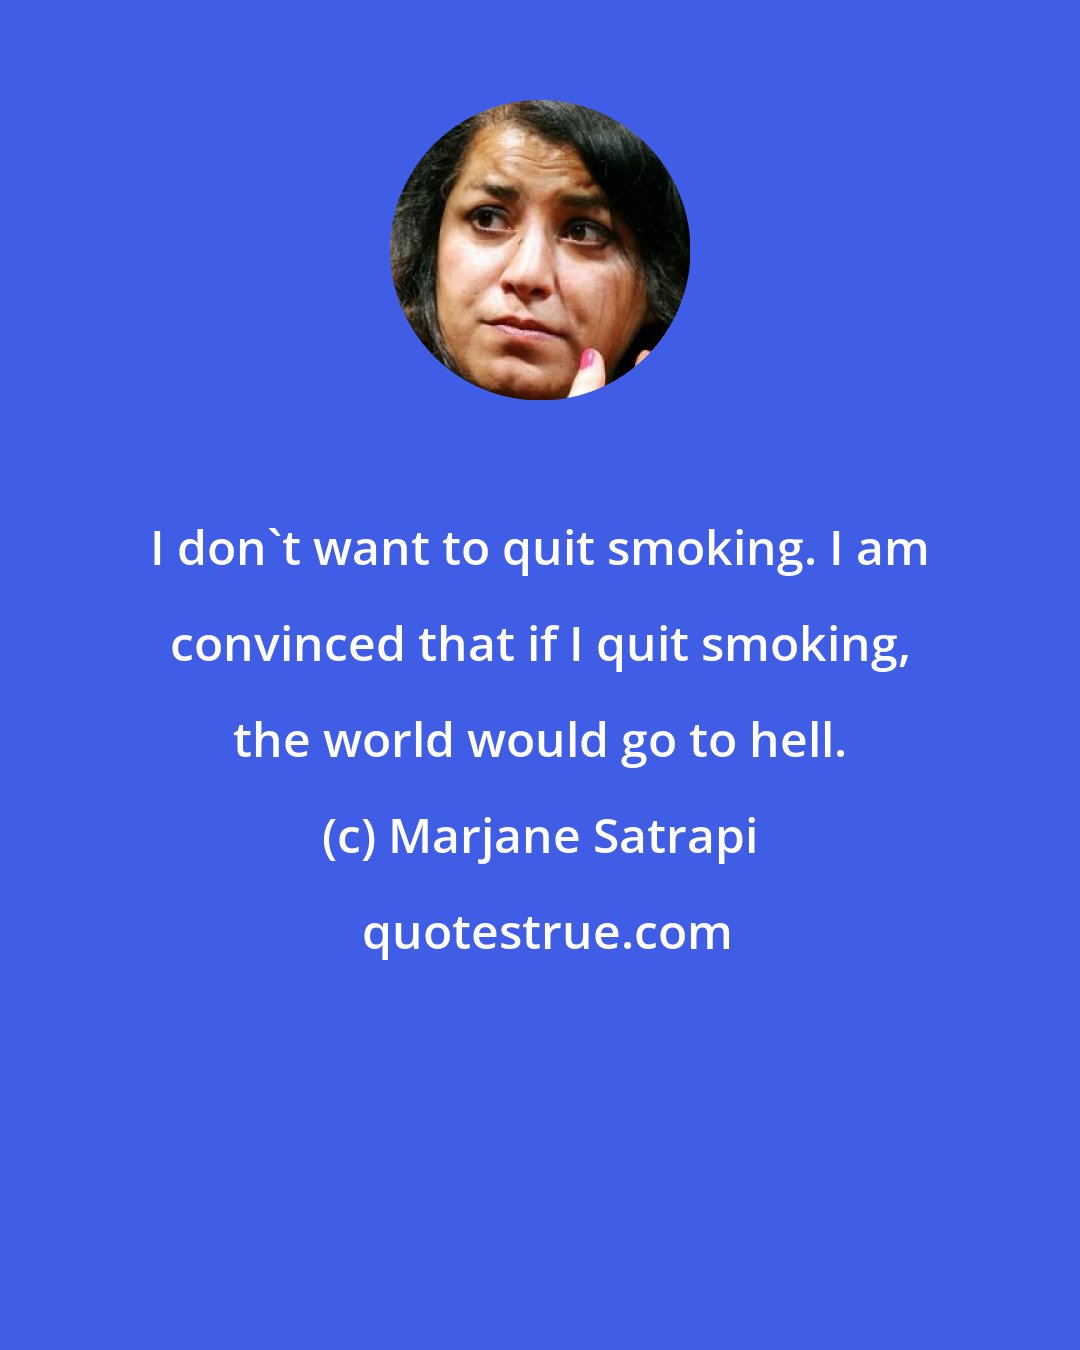 Marjane Satrapi: I don't want to quit smoking. I am convinced that if I quit smoking, the world would go to hell.